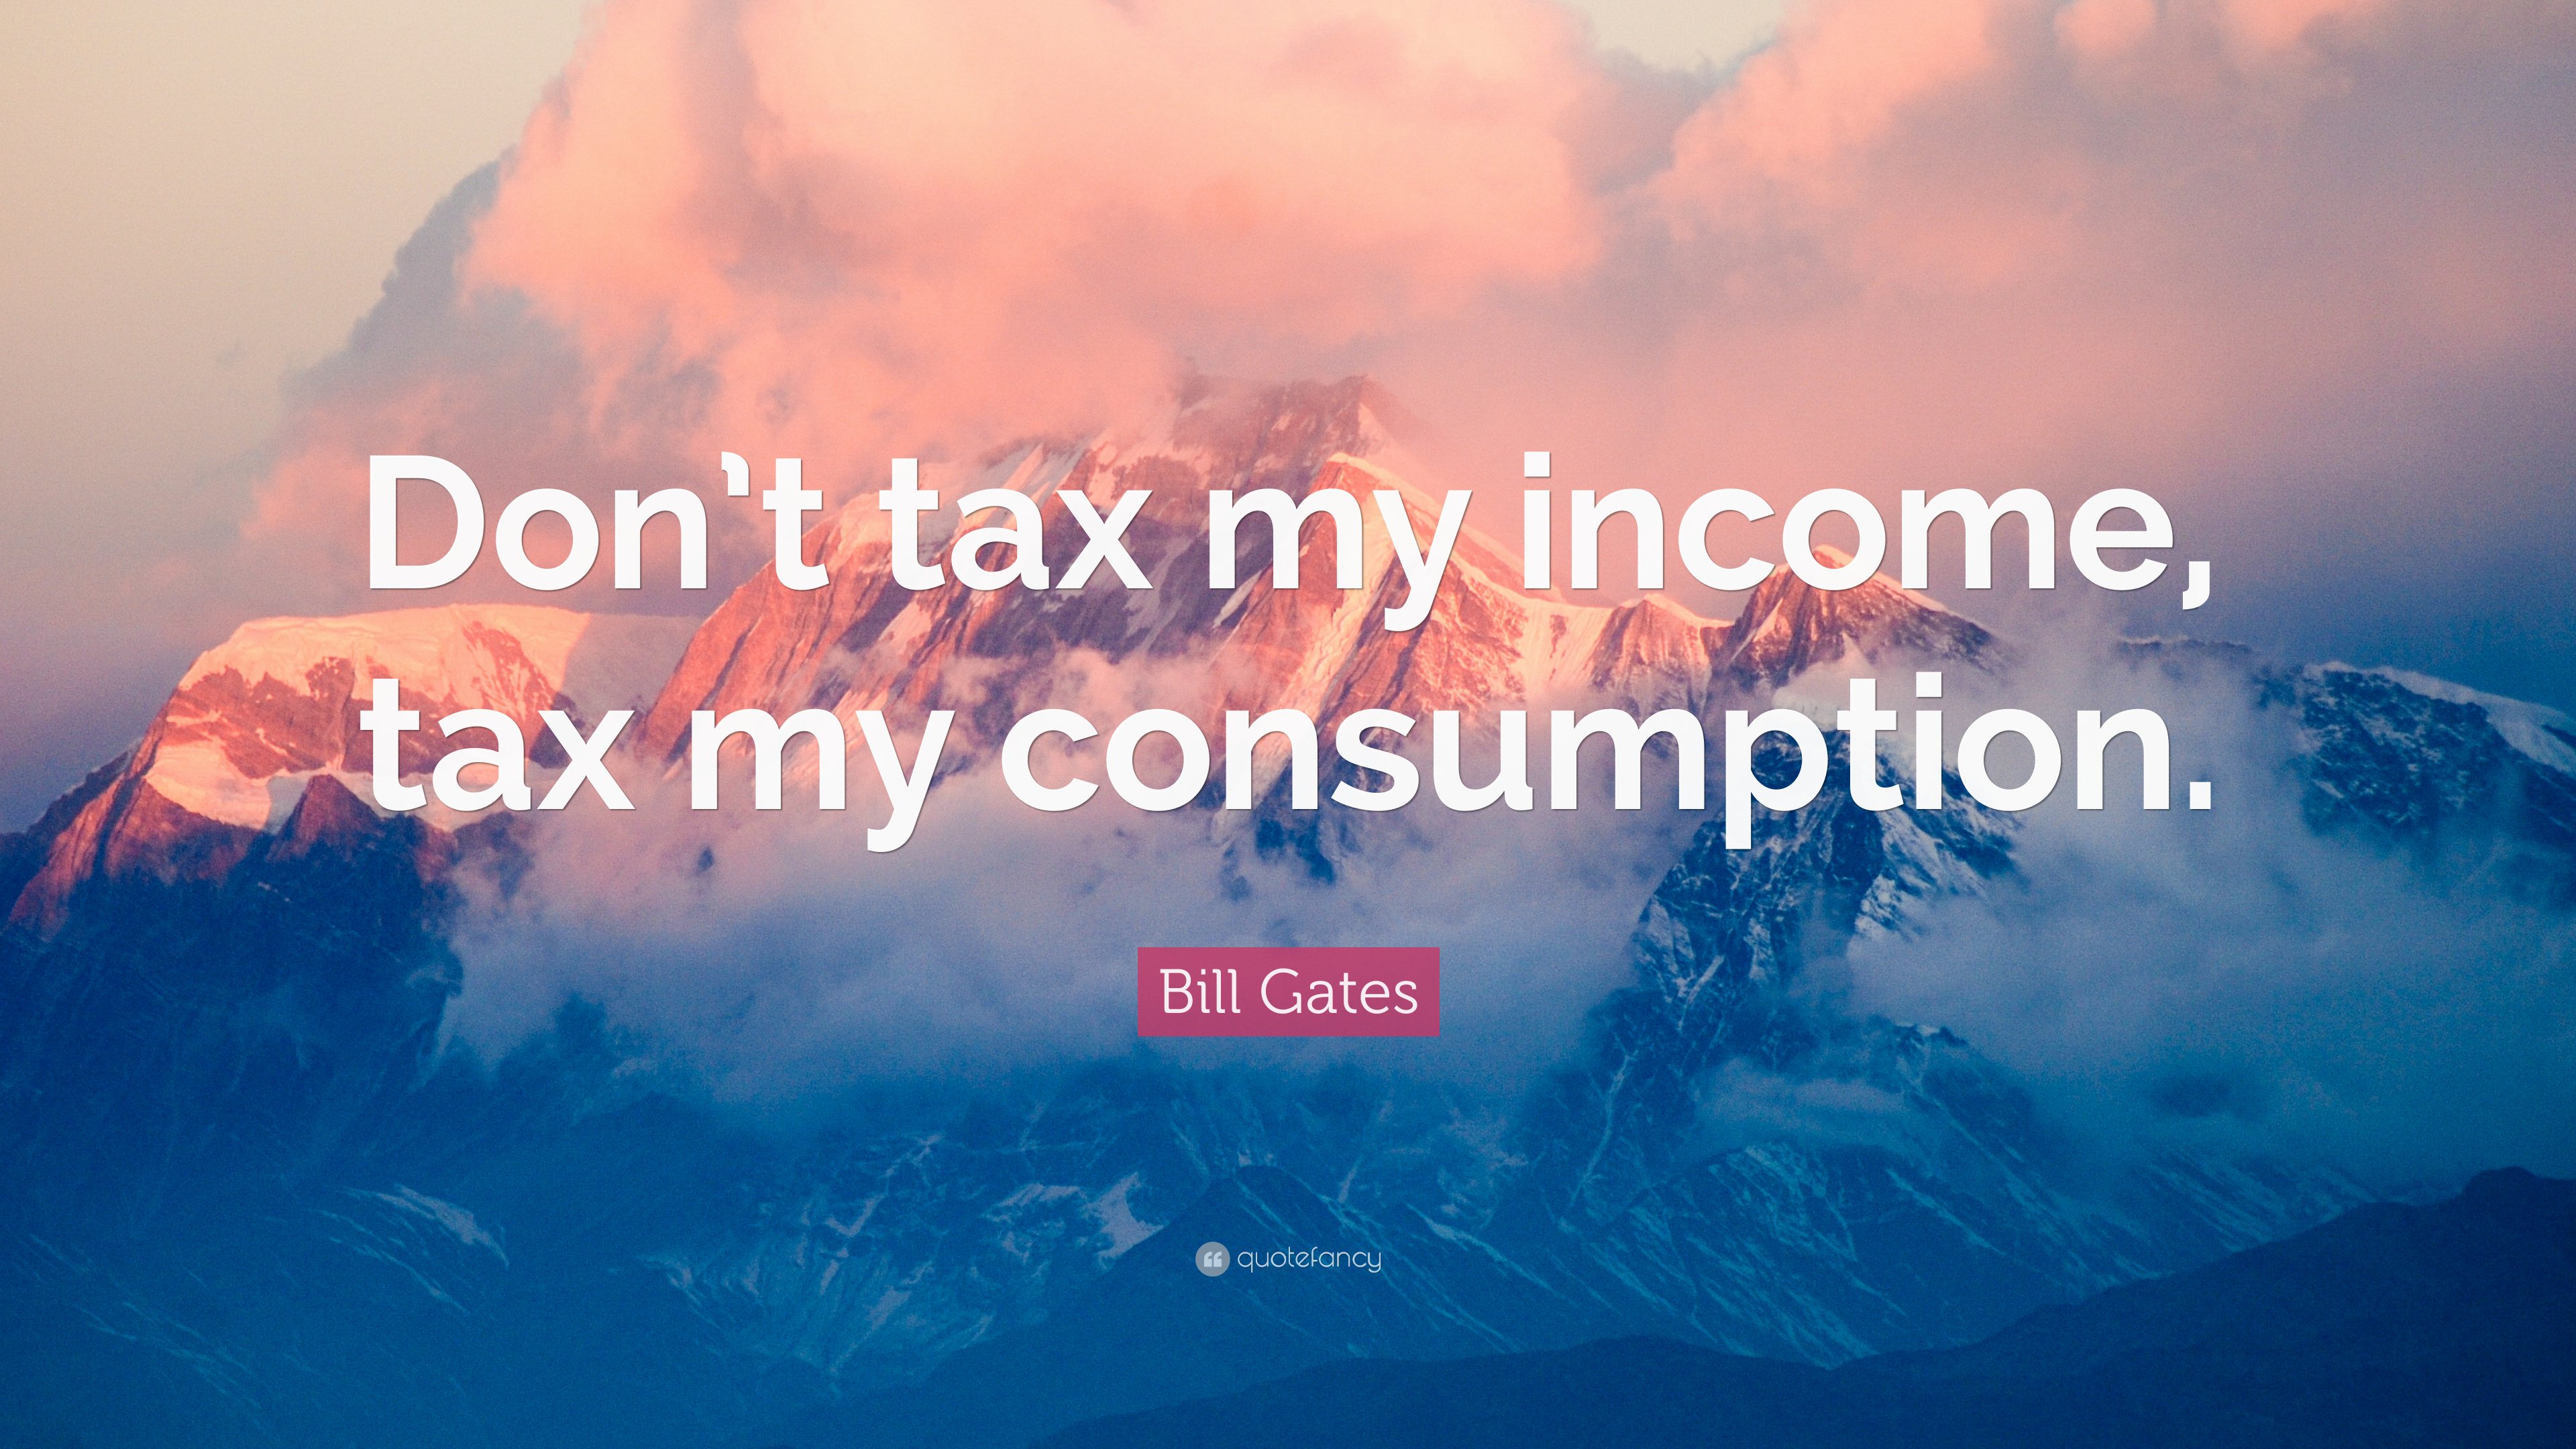 Bill Gates Quote: “Don't tax my income, tax my consumption.”